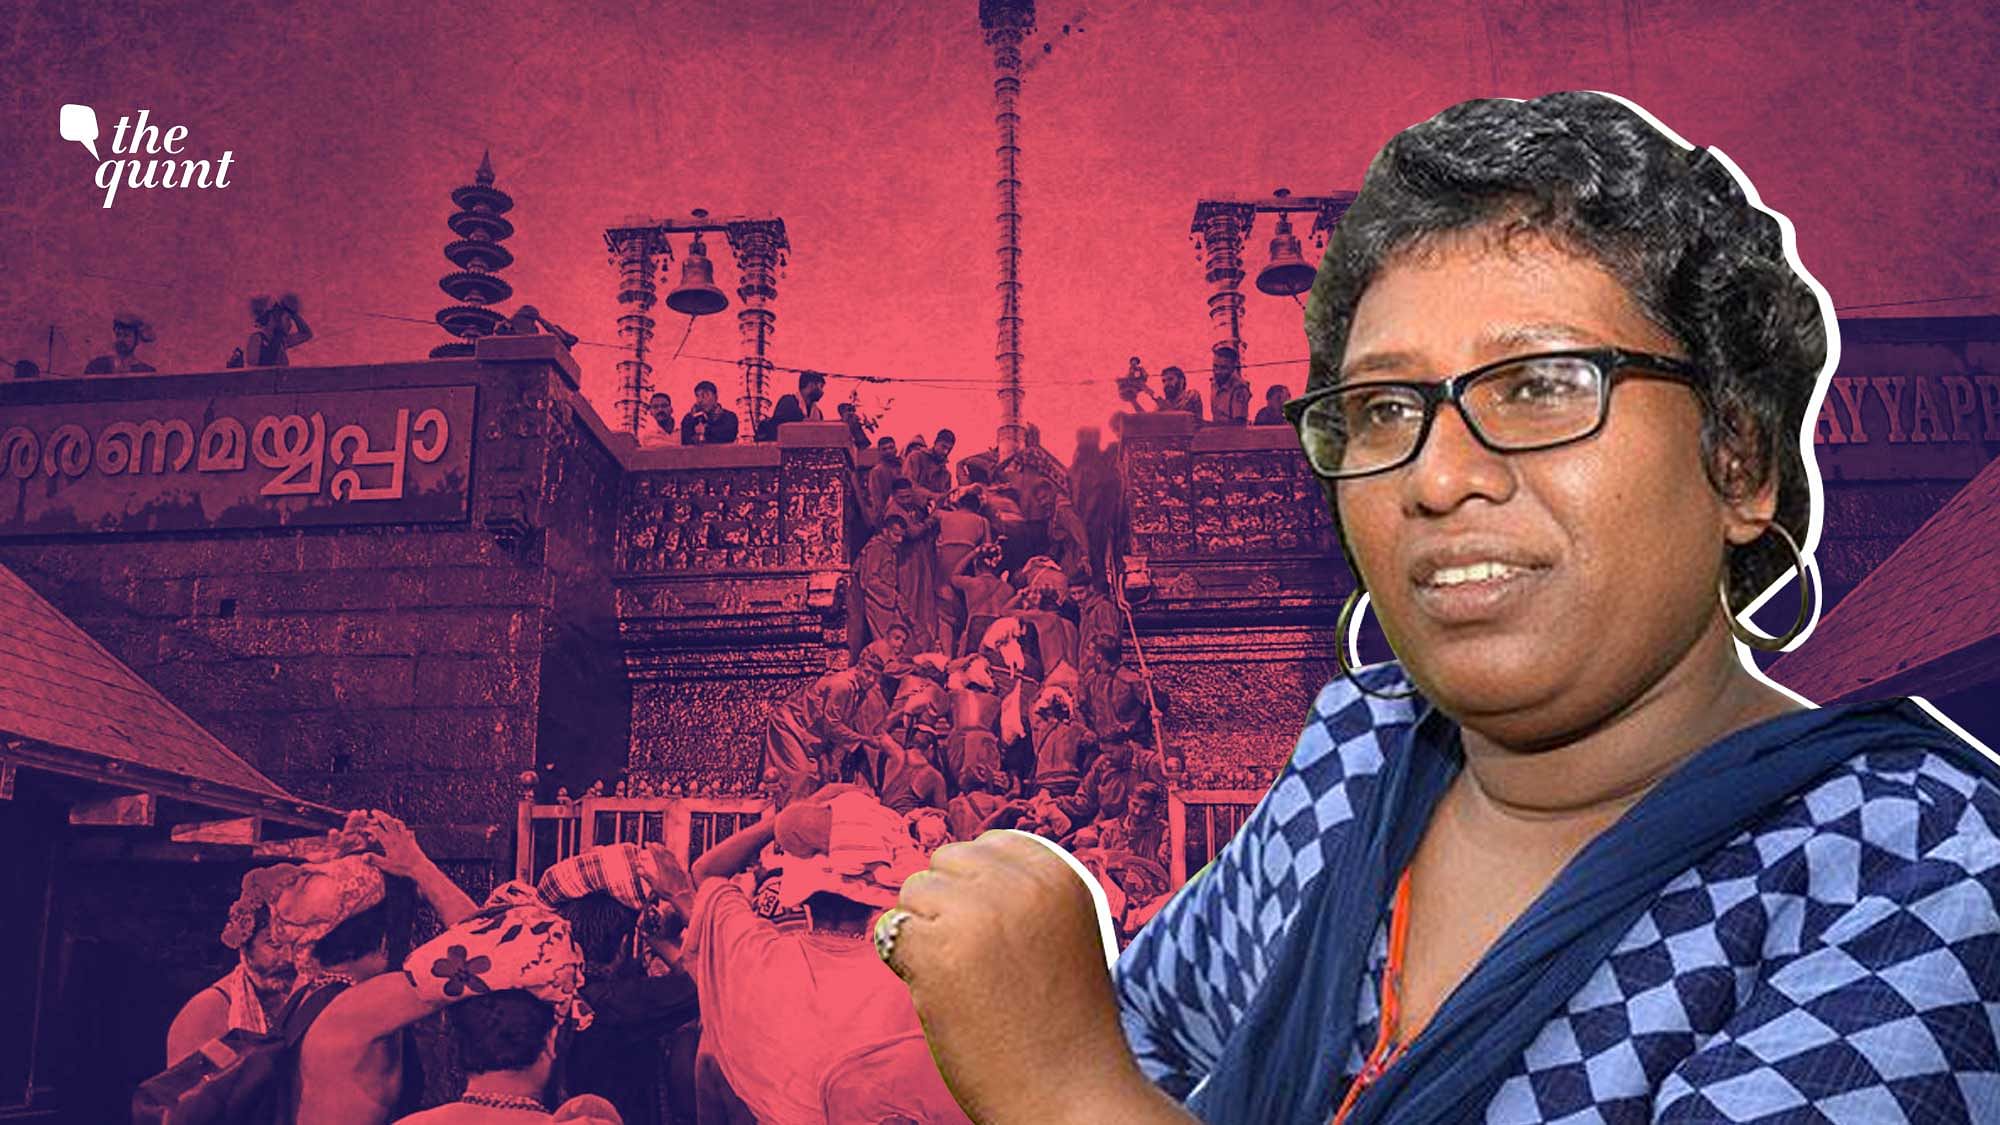 A party which claims to be secular “should not have supported a regressive stand” on Sabarimala, says Bindu Ammini.